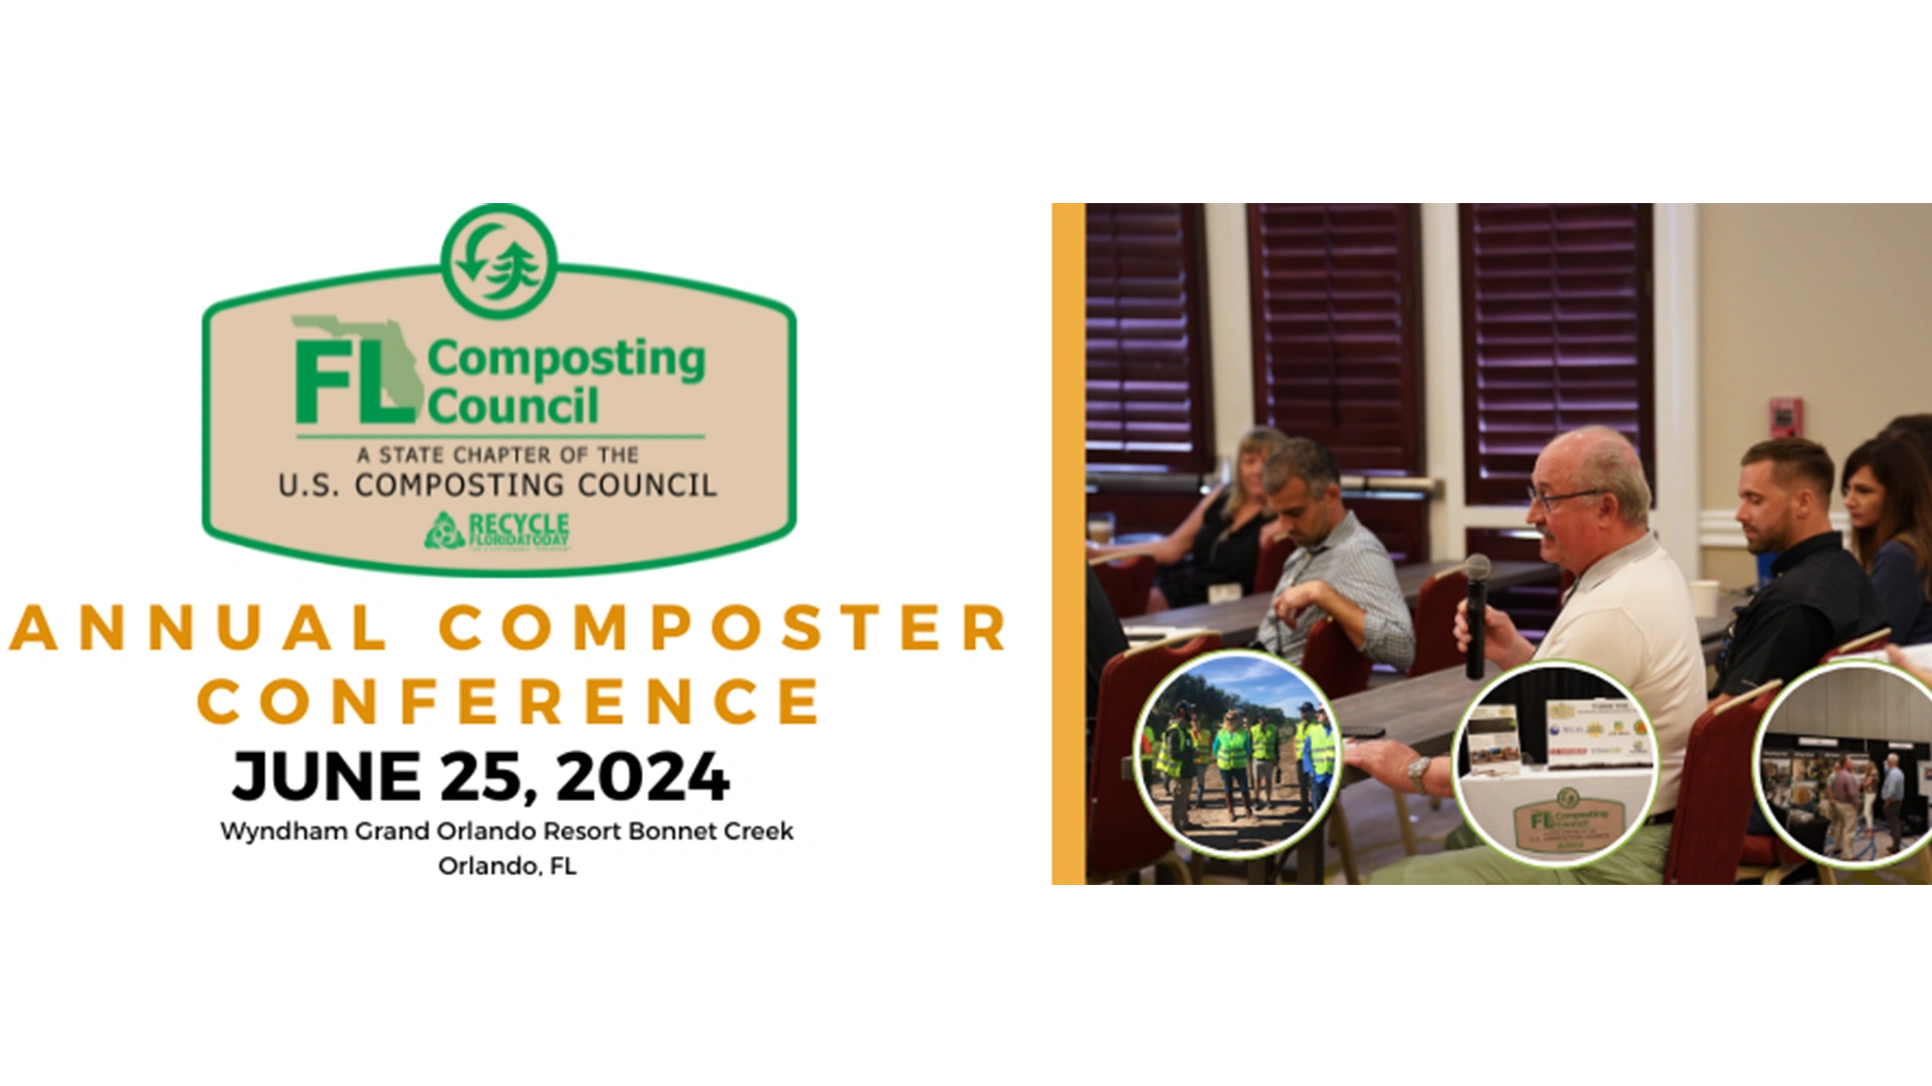 2024 annual composter conference in gold words.  An image of people sitting in a conference setting.